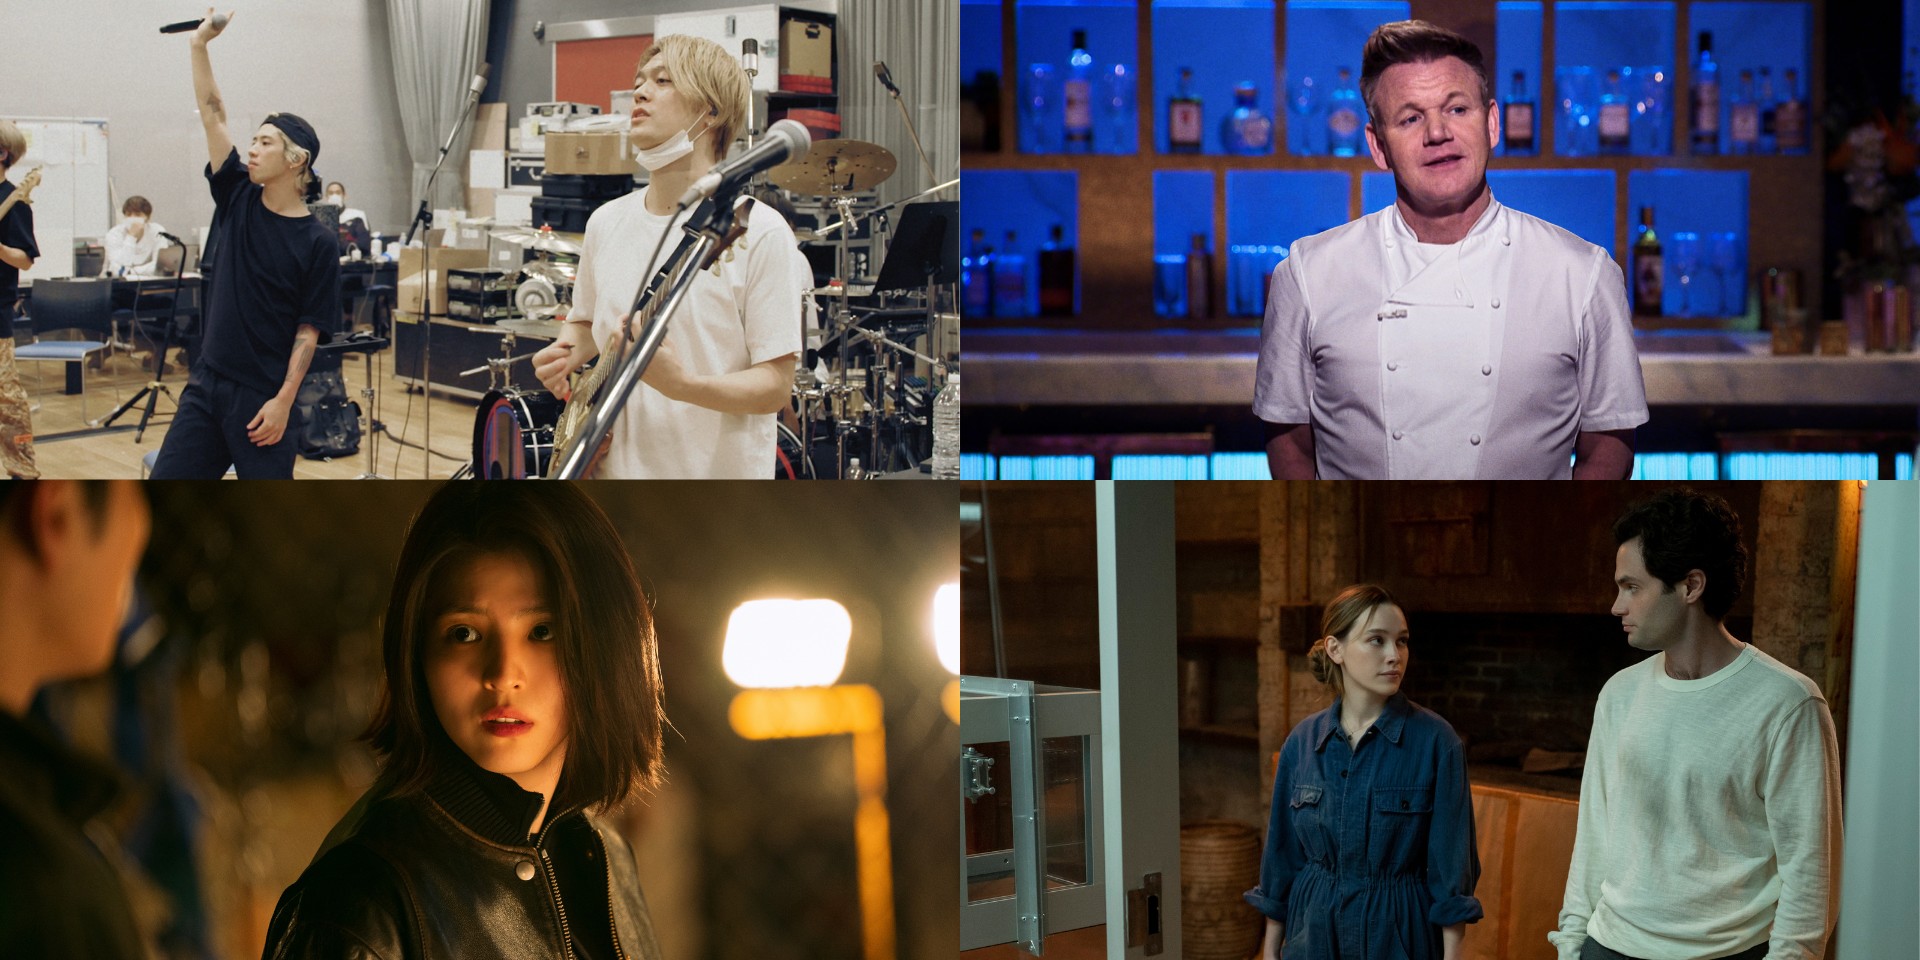 What to watch on Netflix Malaysia this October: You, My Name, ONE OK ROCK, Hell's Kitchen, and more